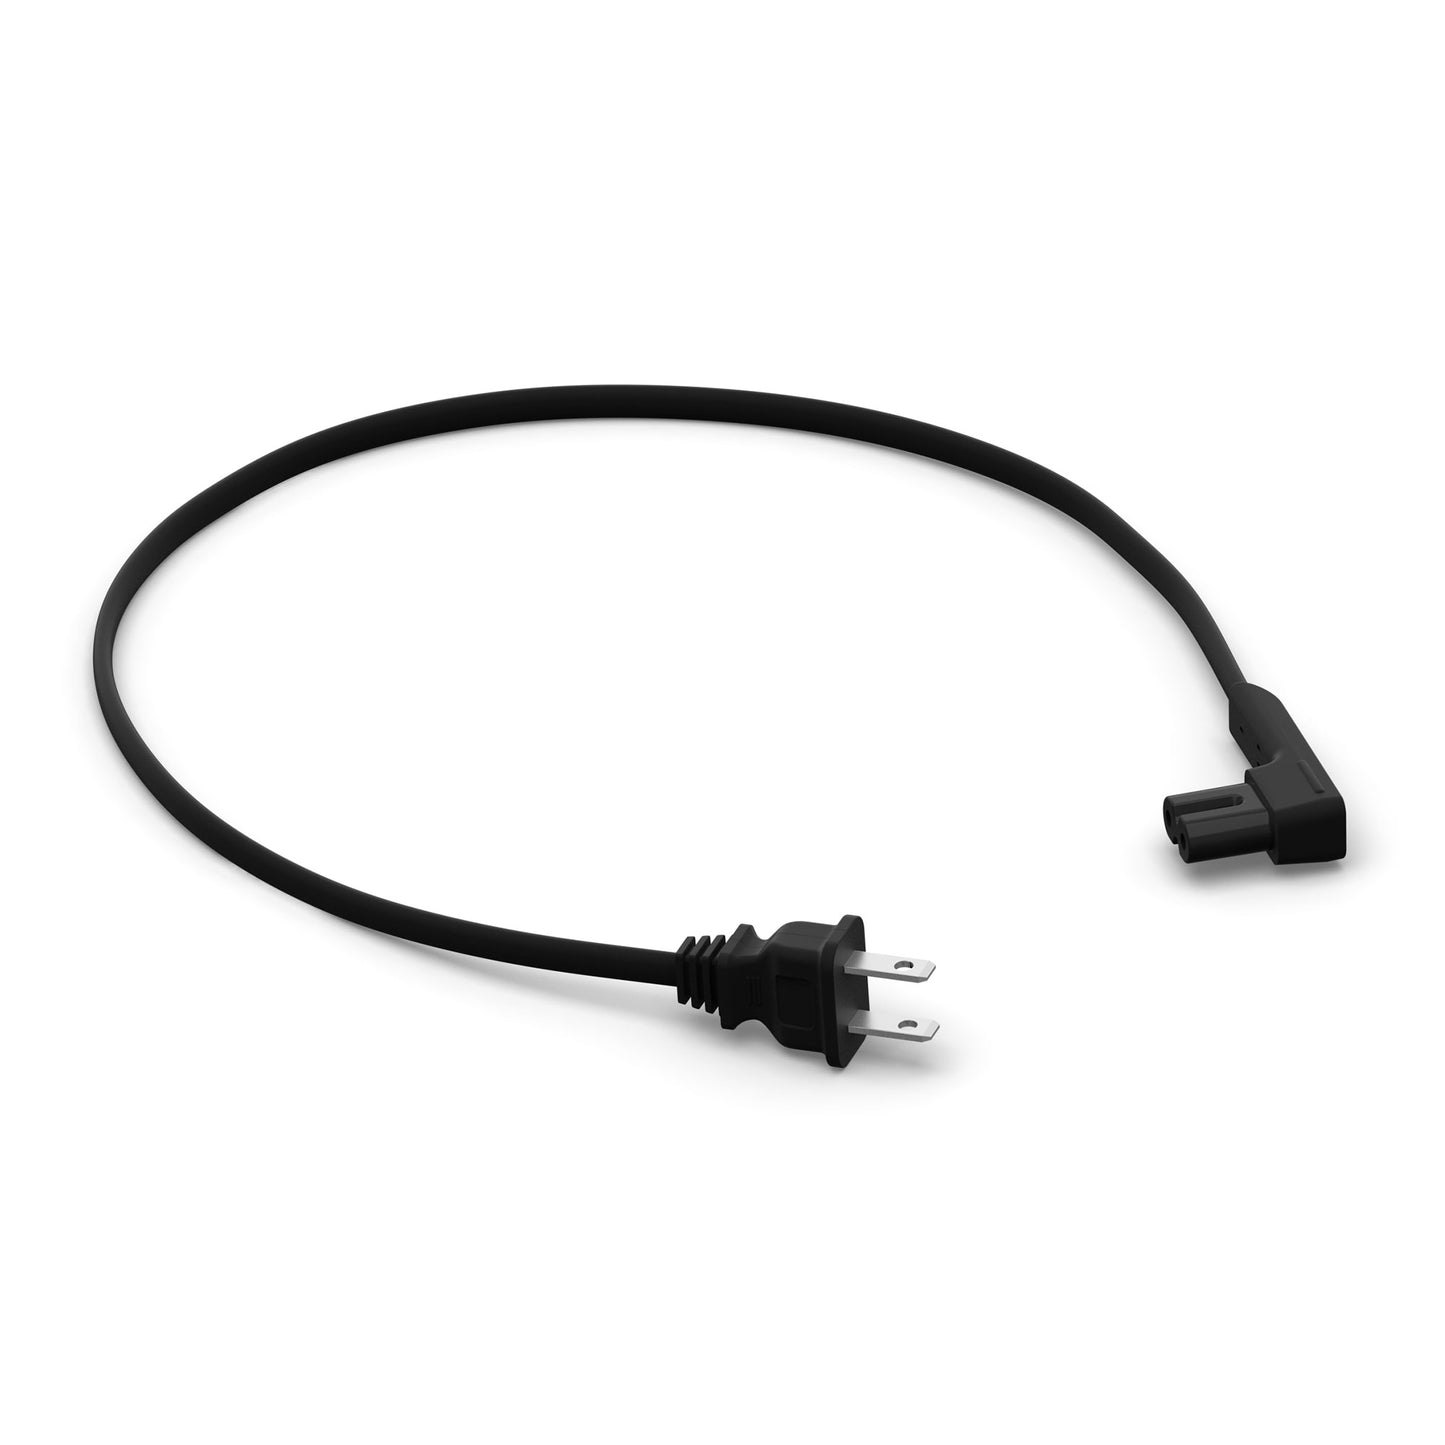 Sonos power cable 19.7in (Black) - Top View